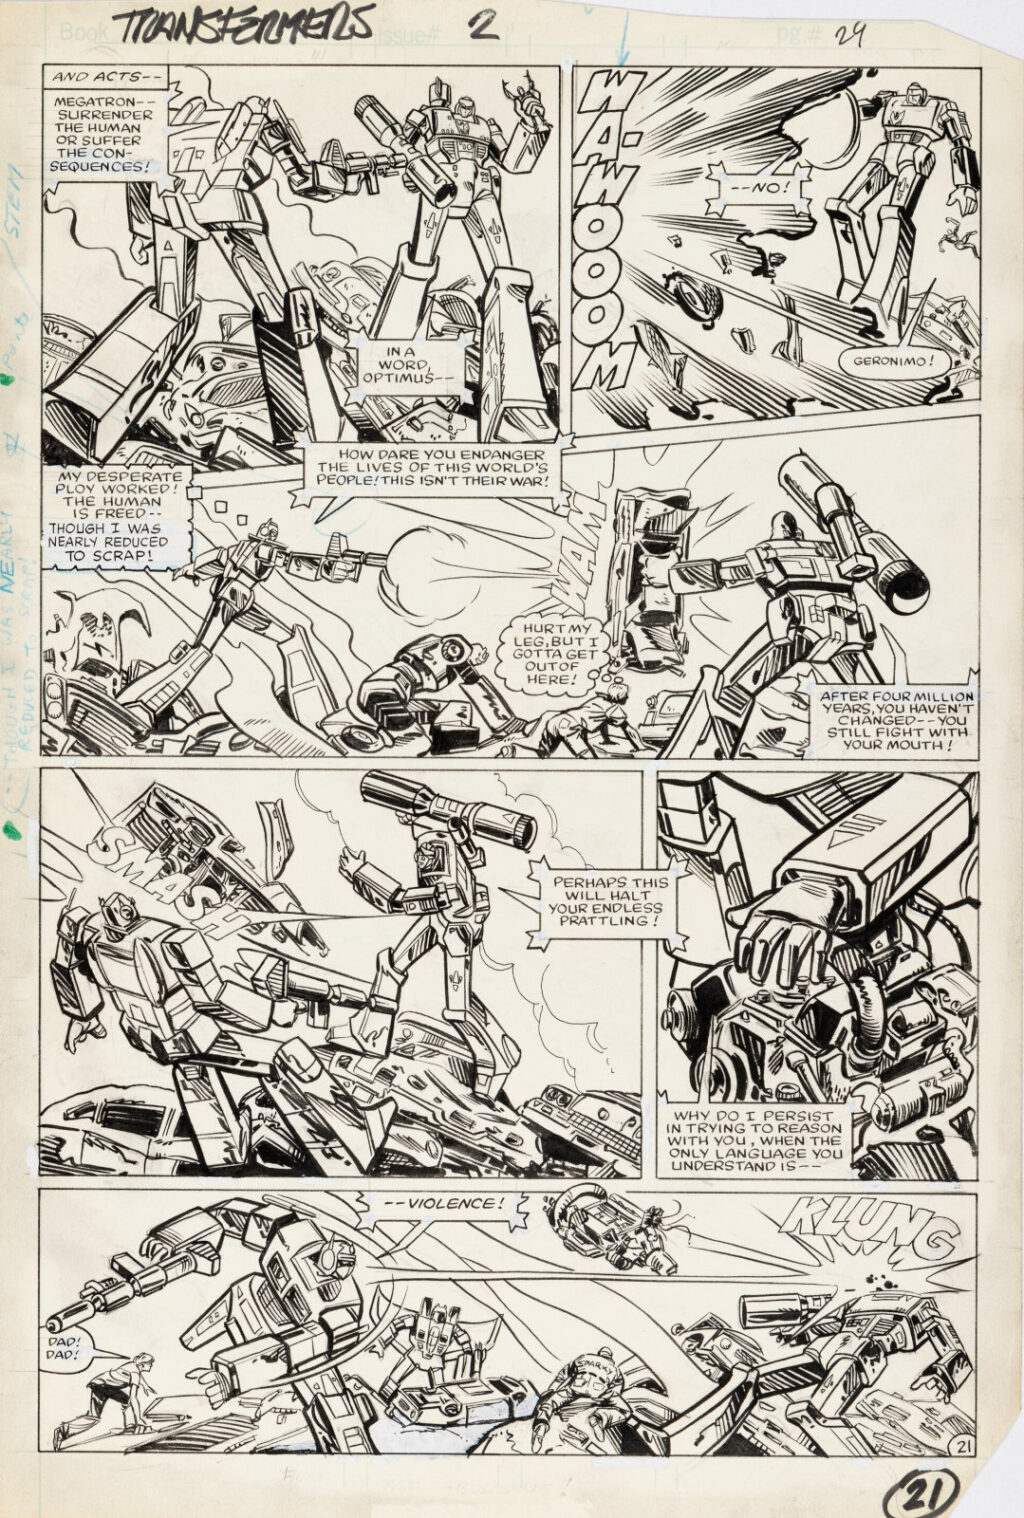 Transformers issue 2 page 21 by Frank Springer and Kim DeMulder